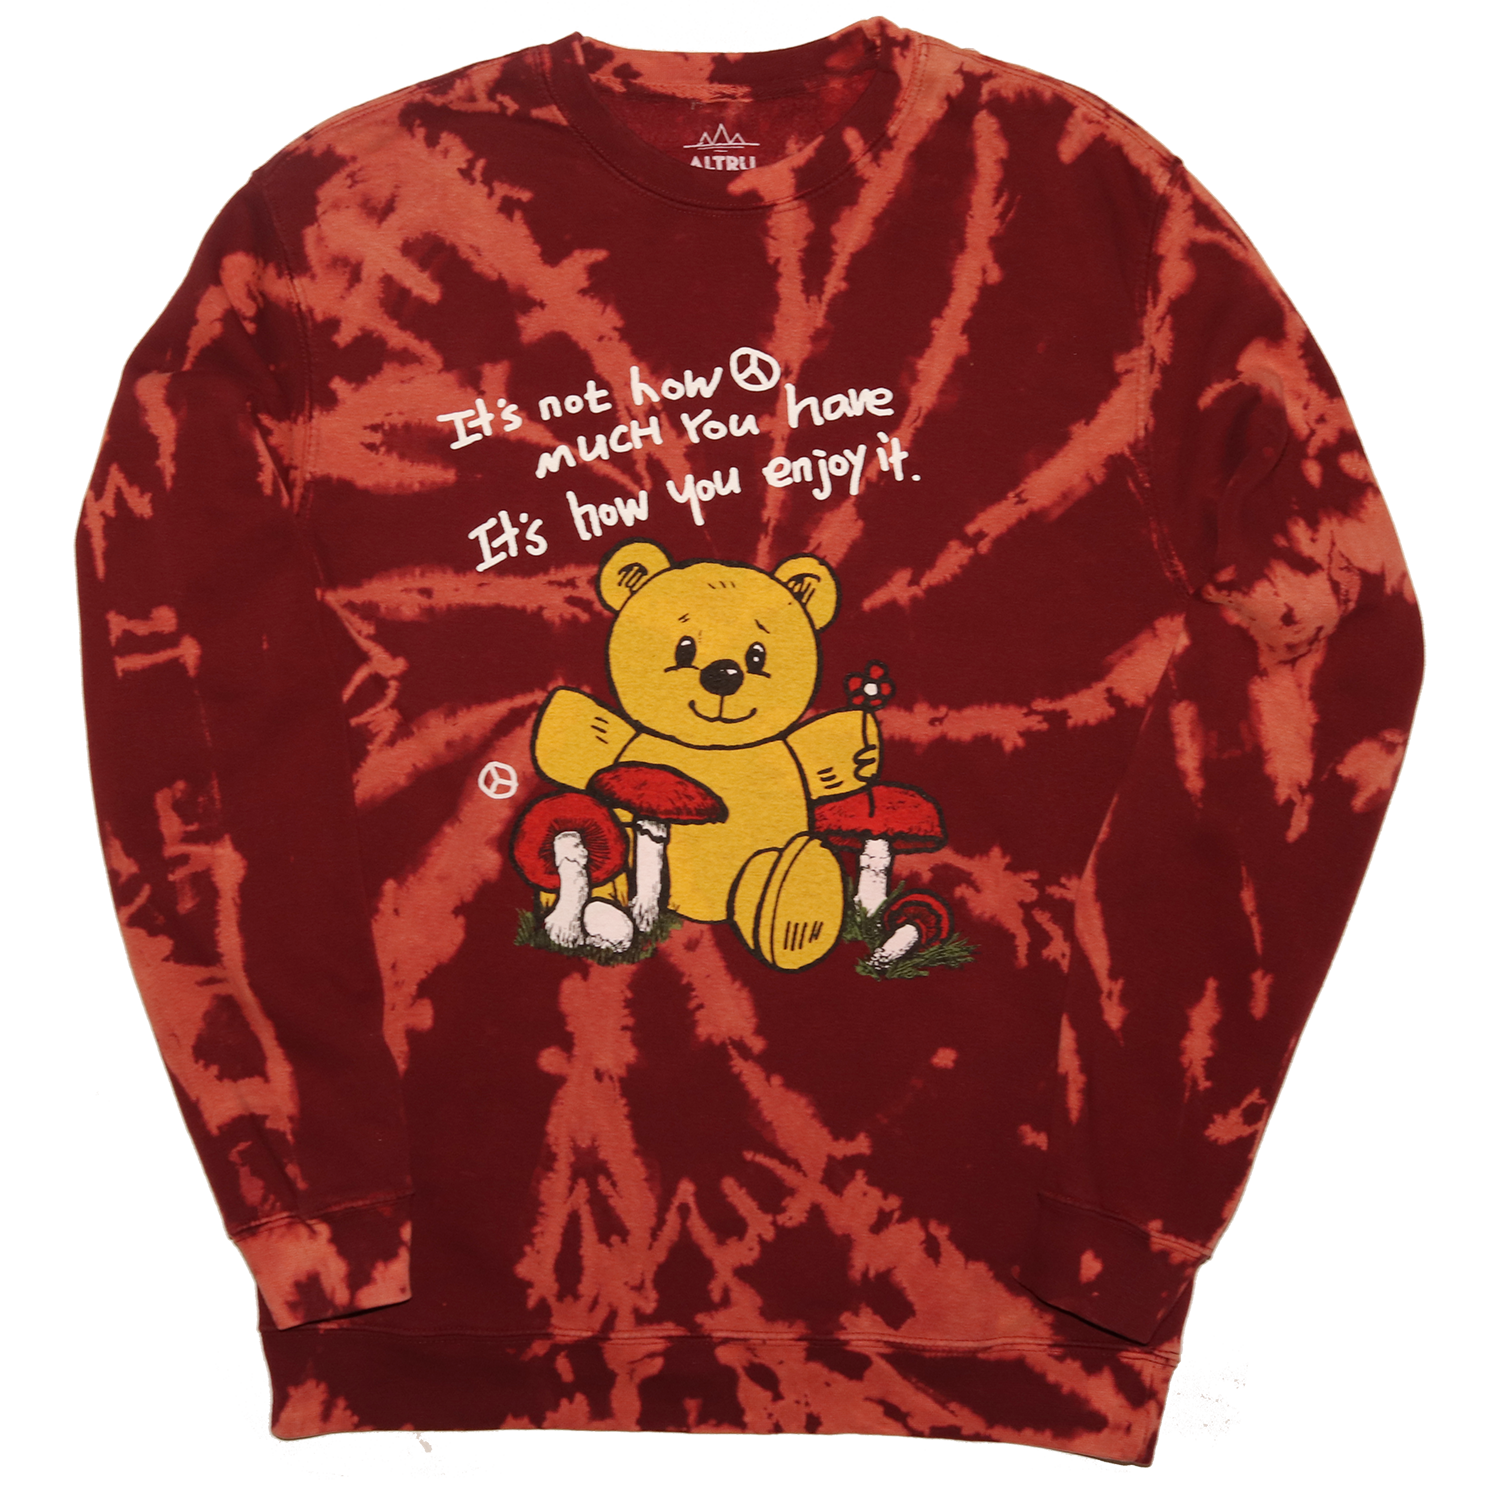 Full front photo of Teddy Bear sitting with mushrooms graphic printed on front of burgundy tie dye fleece fashion sweatshirt. Graphic includes bear, mushrooms, flower, peace sign and the text "It's not how much you have It's how you enjoy it".